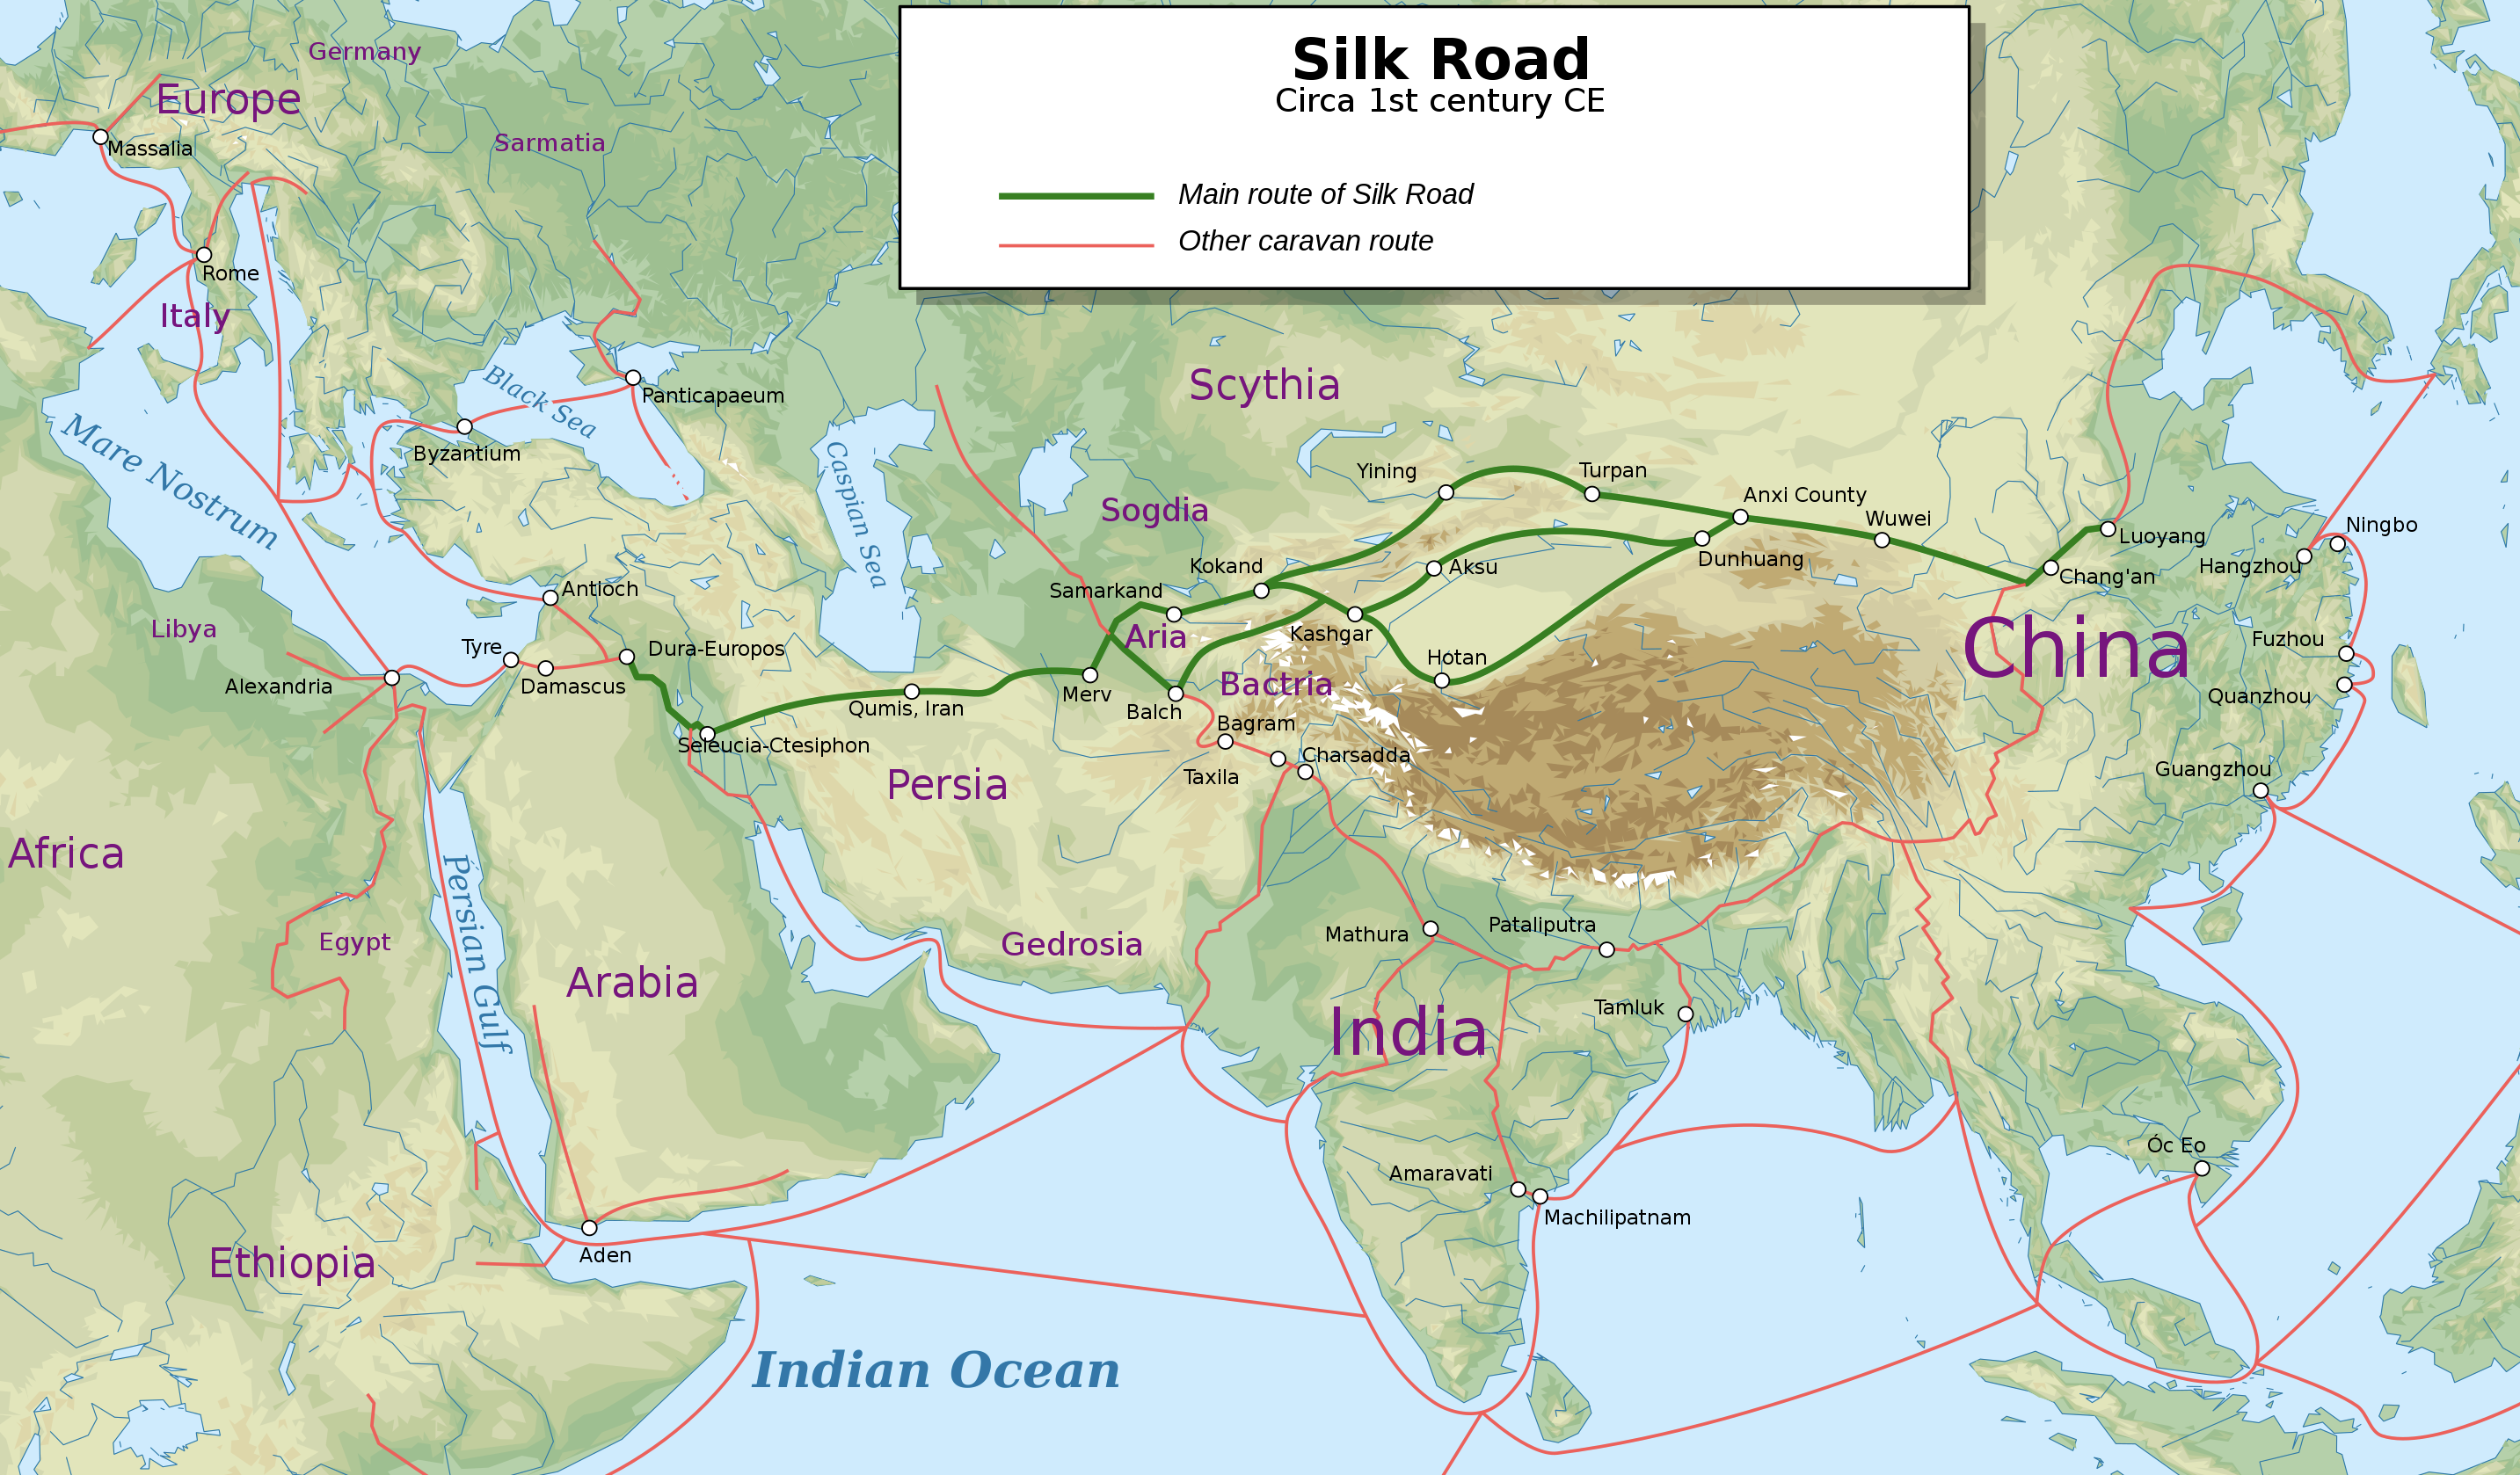 The Silk Road was originally created by the Han dynasty and covered over 4,000 miles.